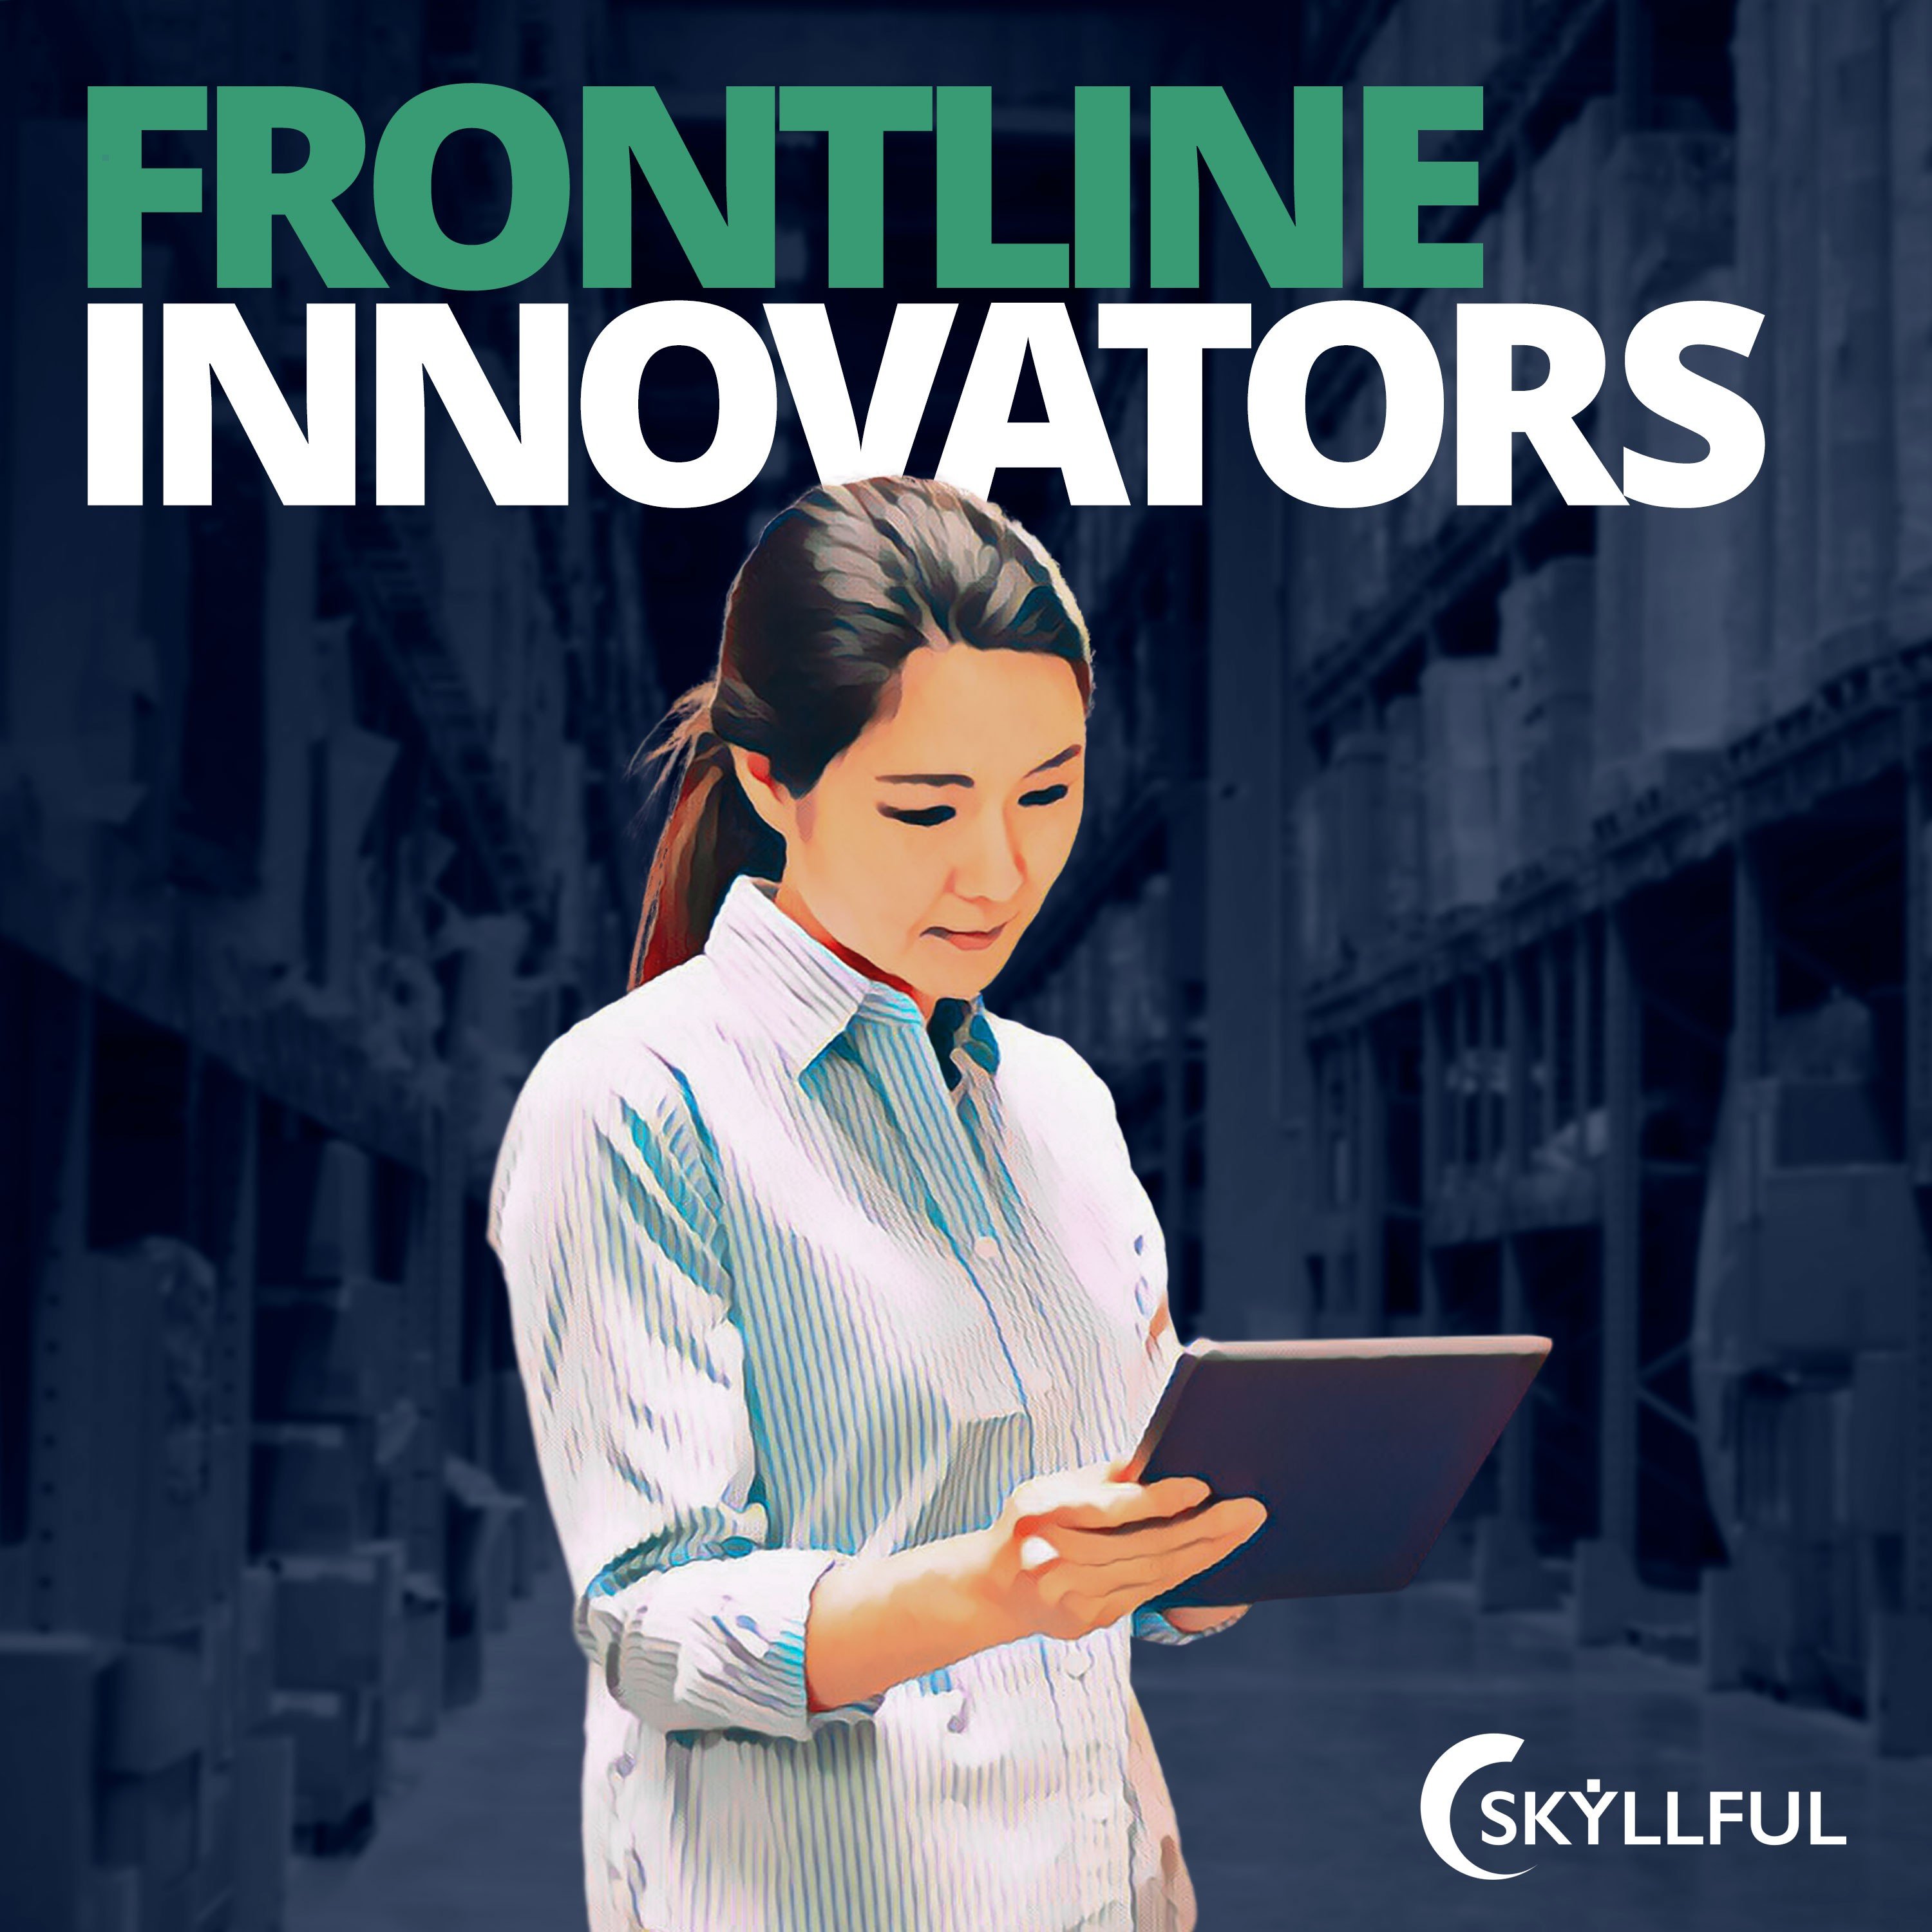 Press Release: Skyllful Celebrates The Momentum of Its Frontline Innovators Podcast That Has Revealed Valuable Insights About Factors Driving Digital Adoption by Frontline Workers